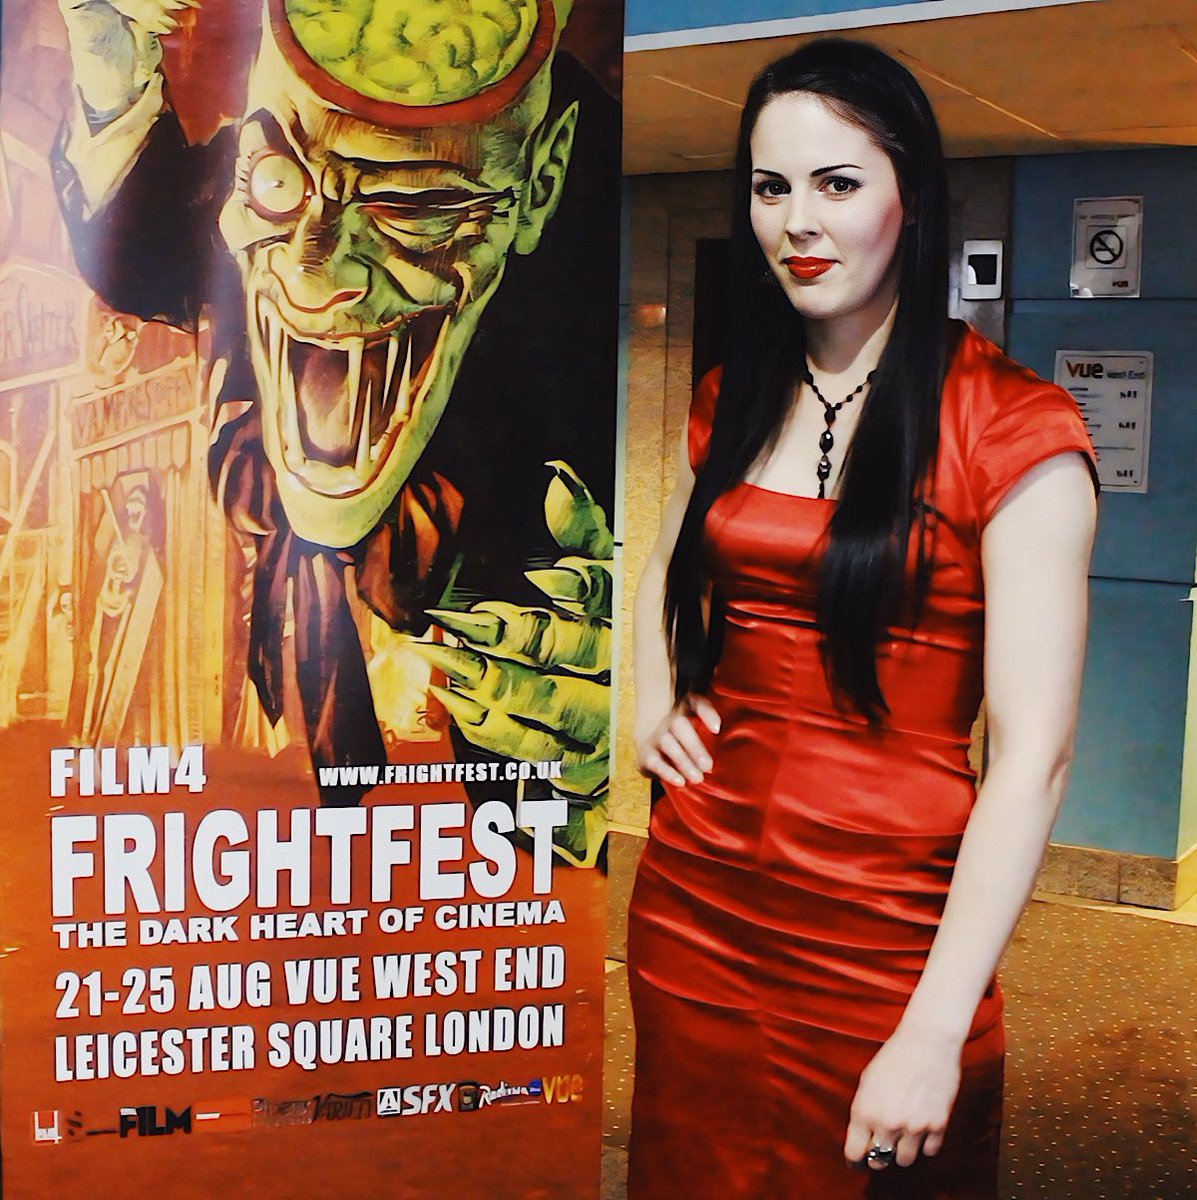 Whoa! Flashback to FrightFest 2014 in Leicester Square, where I was grilling interviewees for my channel (and affiliates). That red dress! 💃🙌
. . .
#FrightFestFlashback #HorrorInterviews #LeicesterSquare #FlashbackFriday #Memories #FrightFest2014